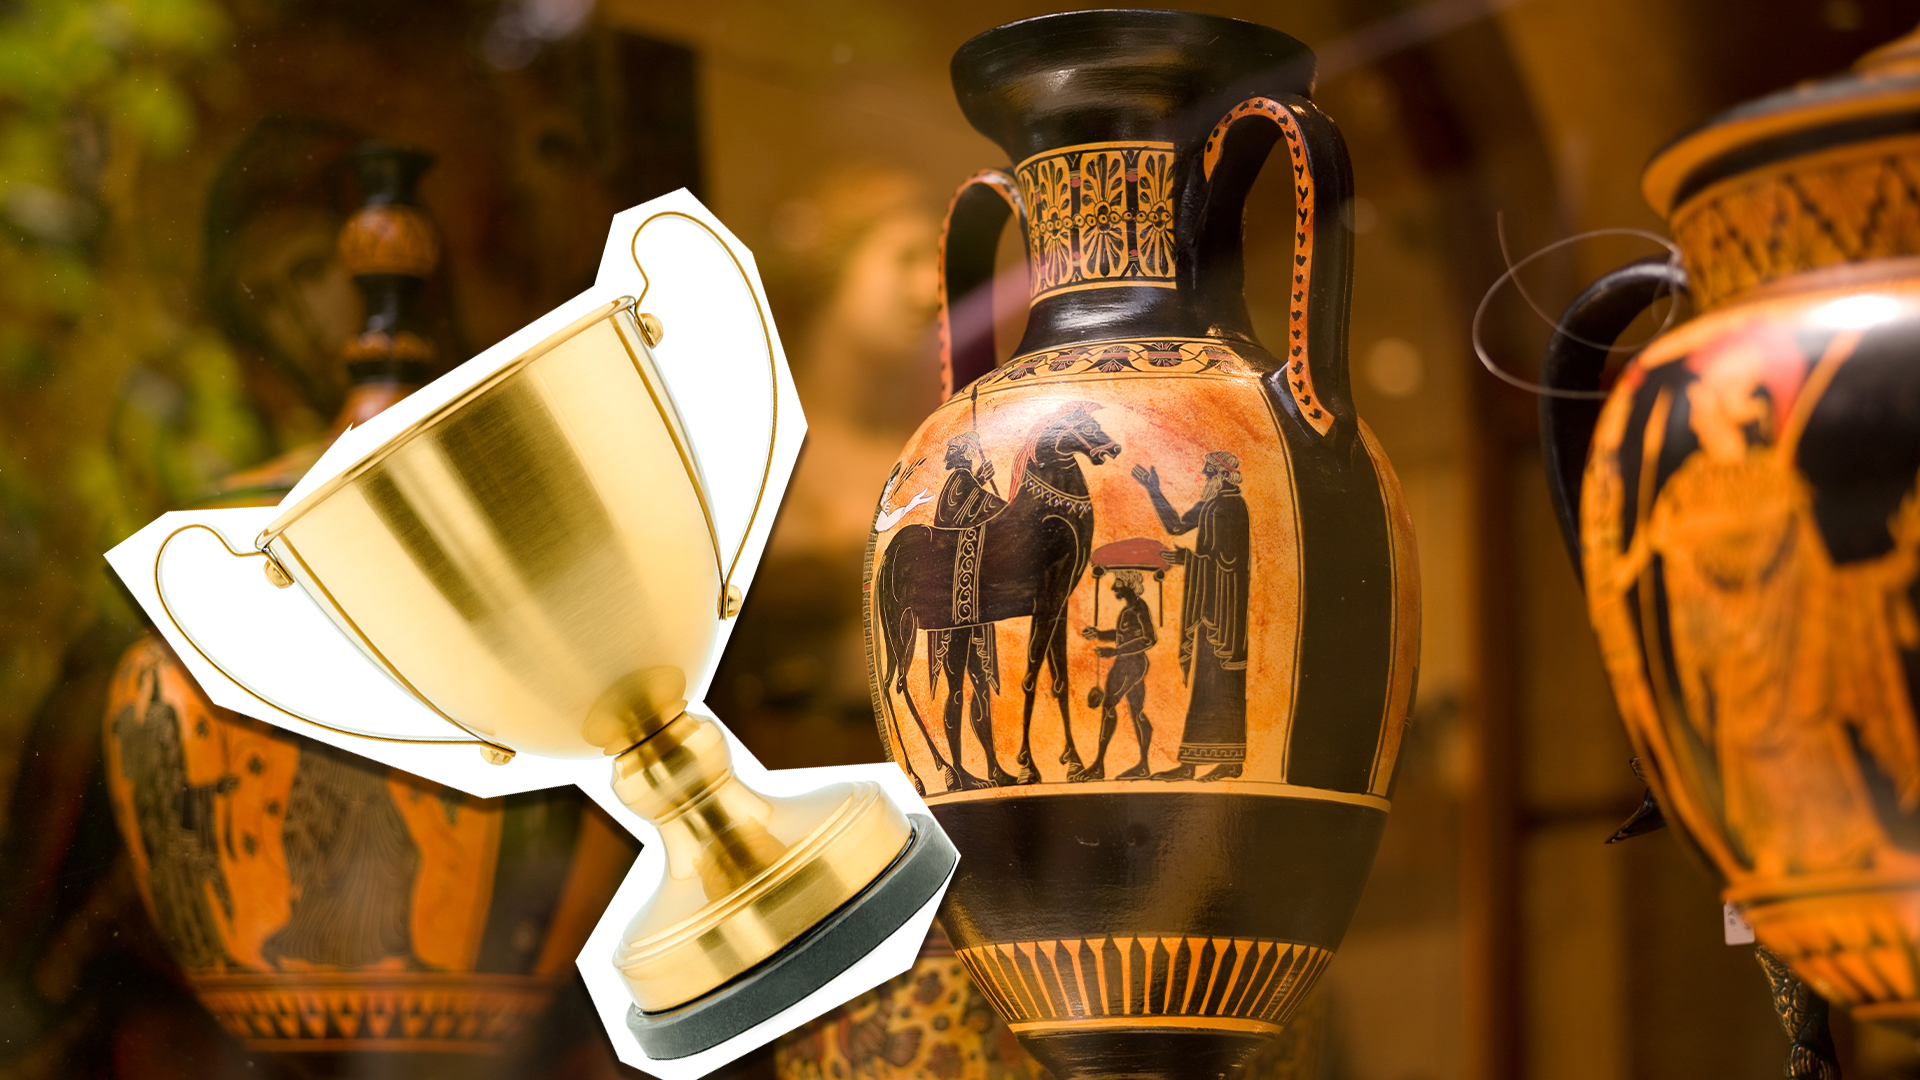 Greek vases and a trophy